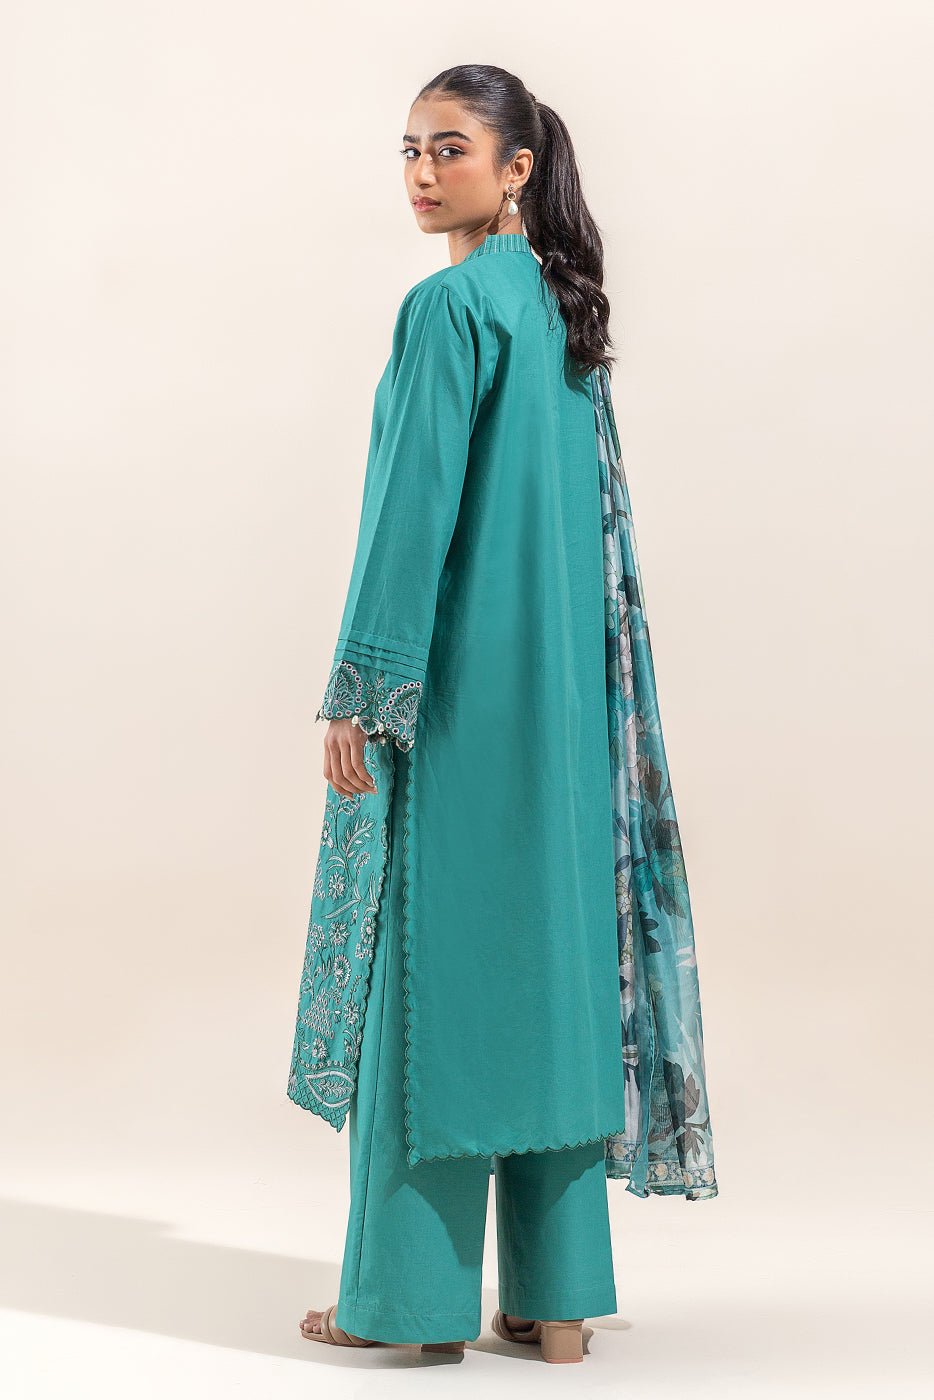 3 PIECE EMBROIDERED LAWN SUIT-CARIBBEAN ALLURE (UNSTITCHED)